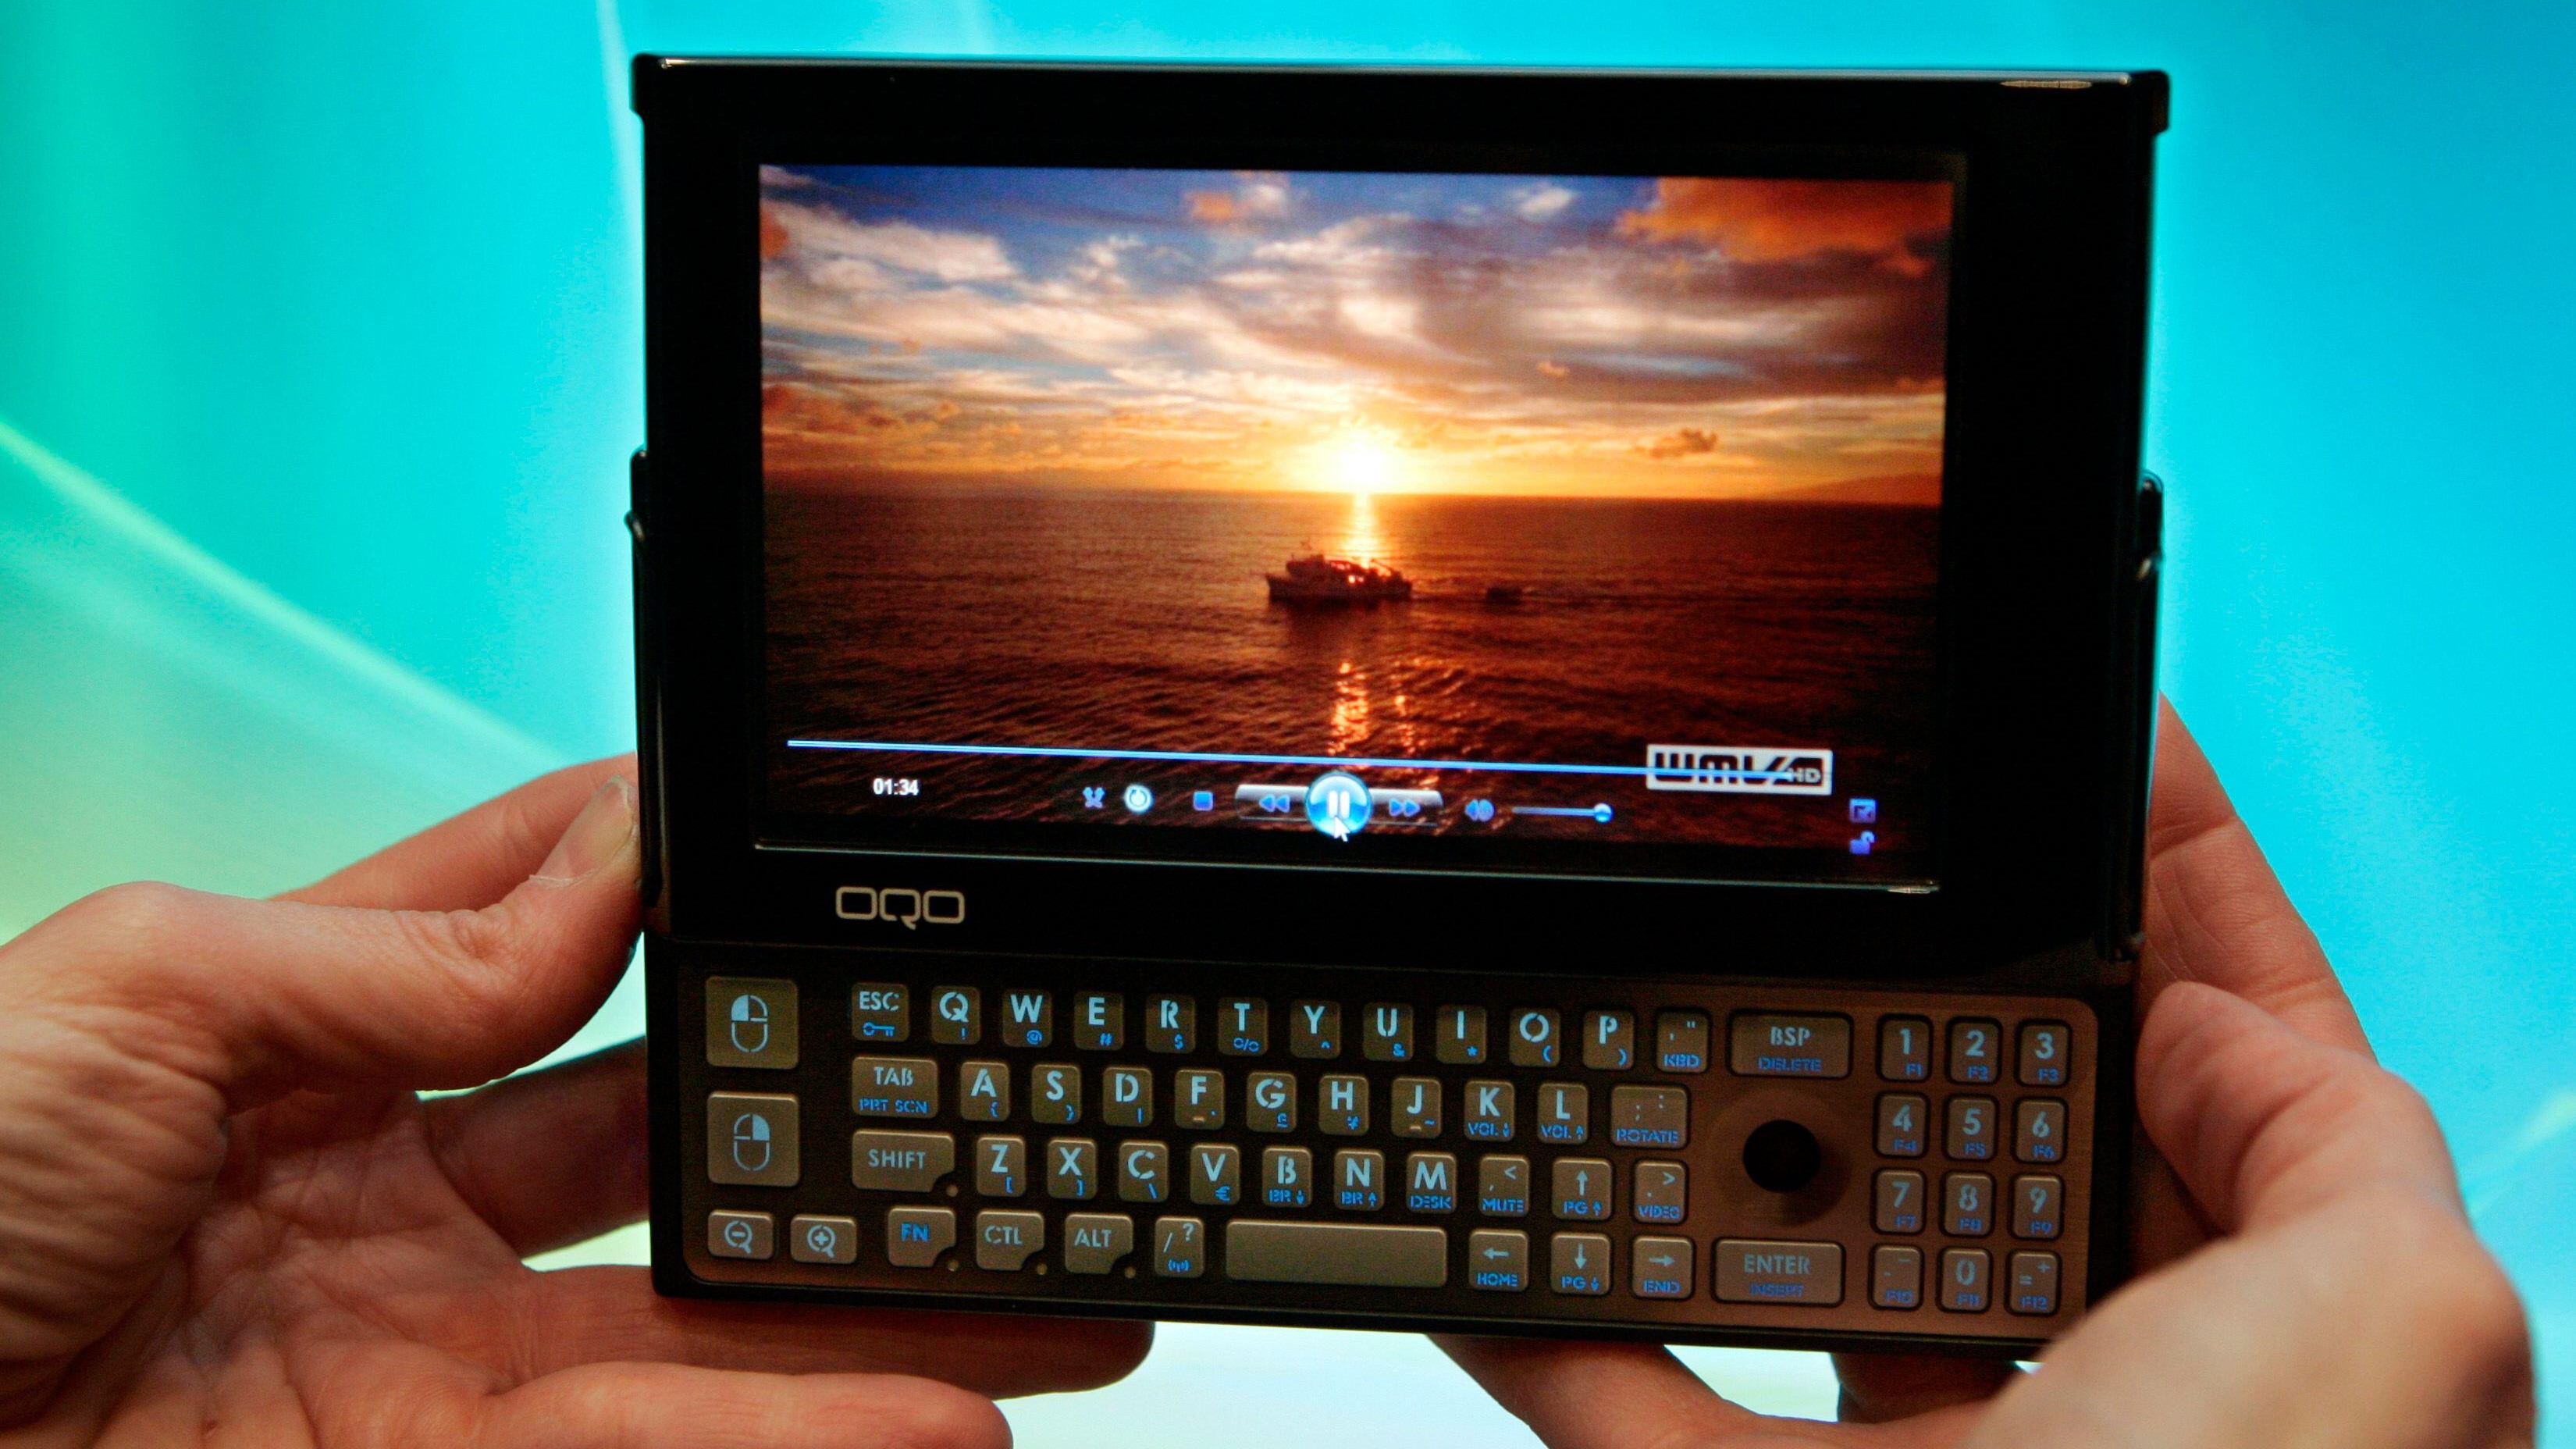 Fingers holding up a handheld PC with a slide out keyboard.